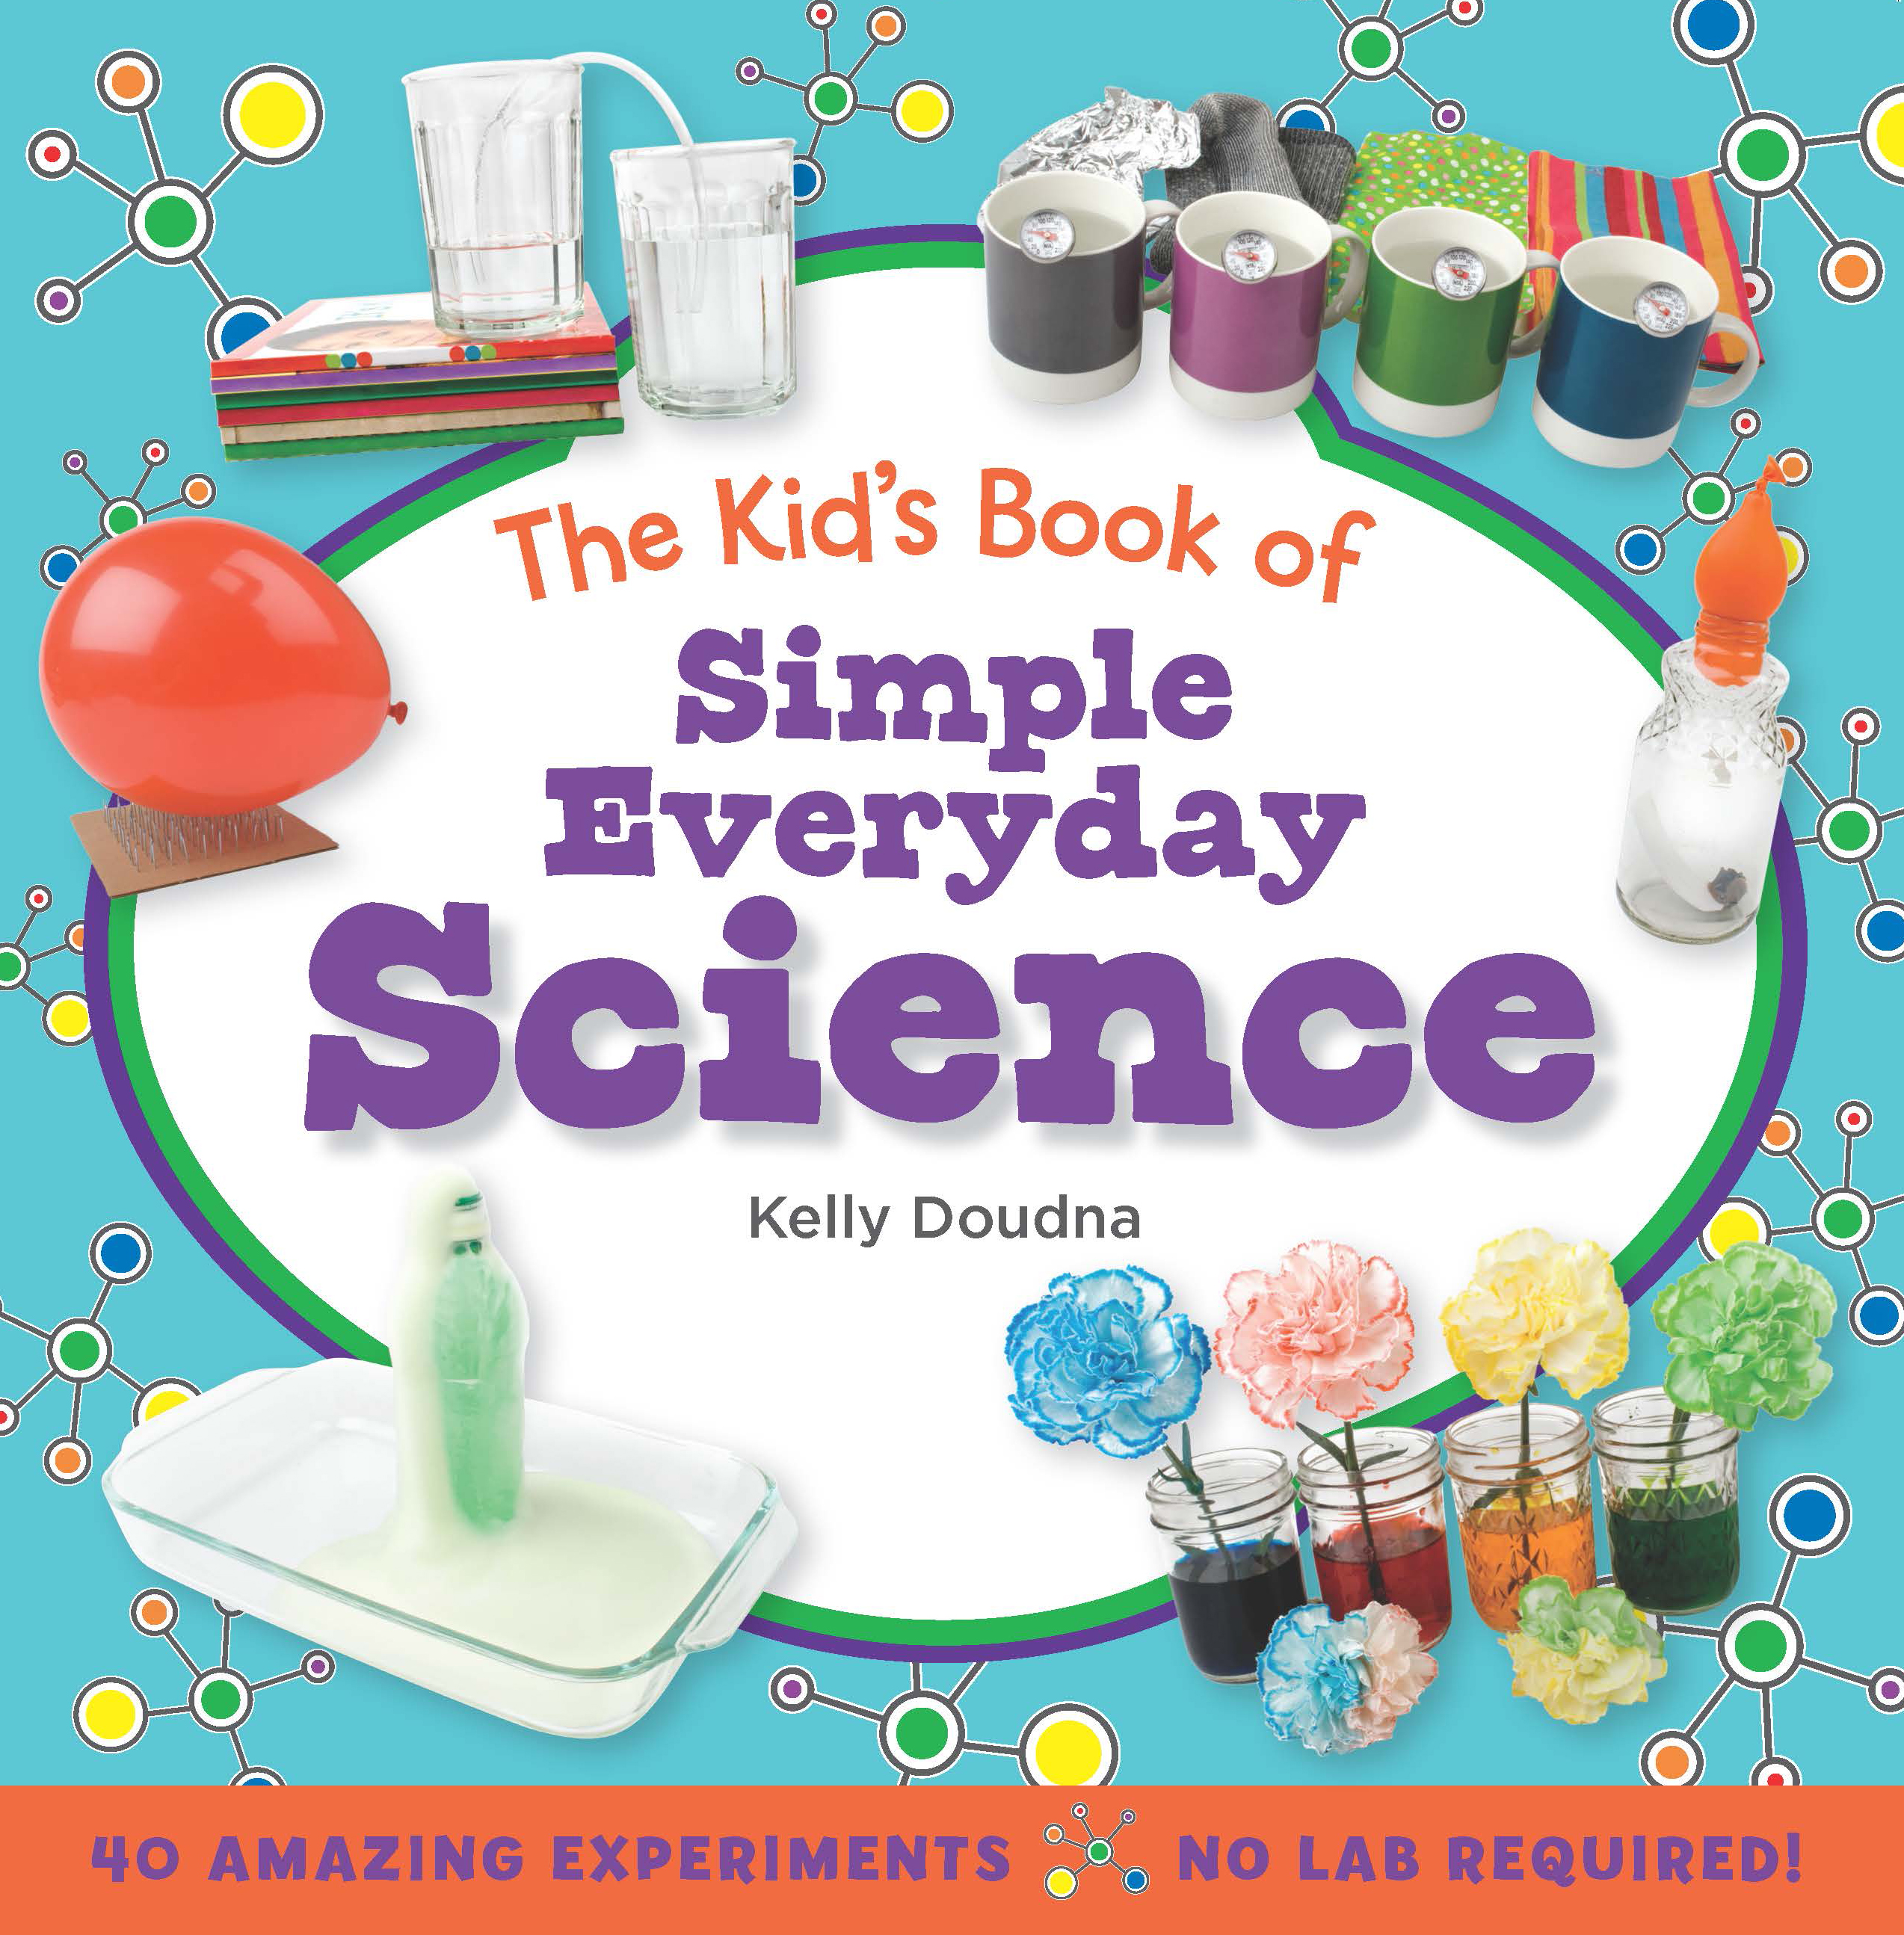 The Kids’ Book of Simple Science